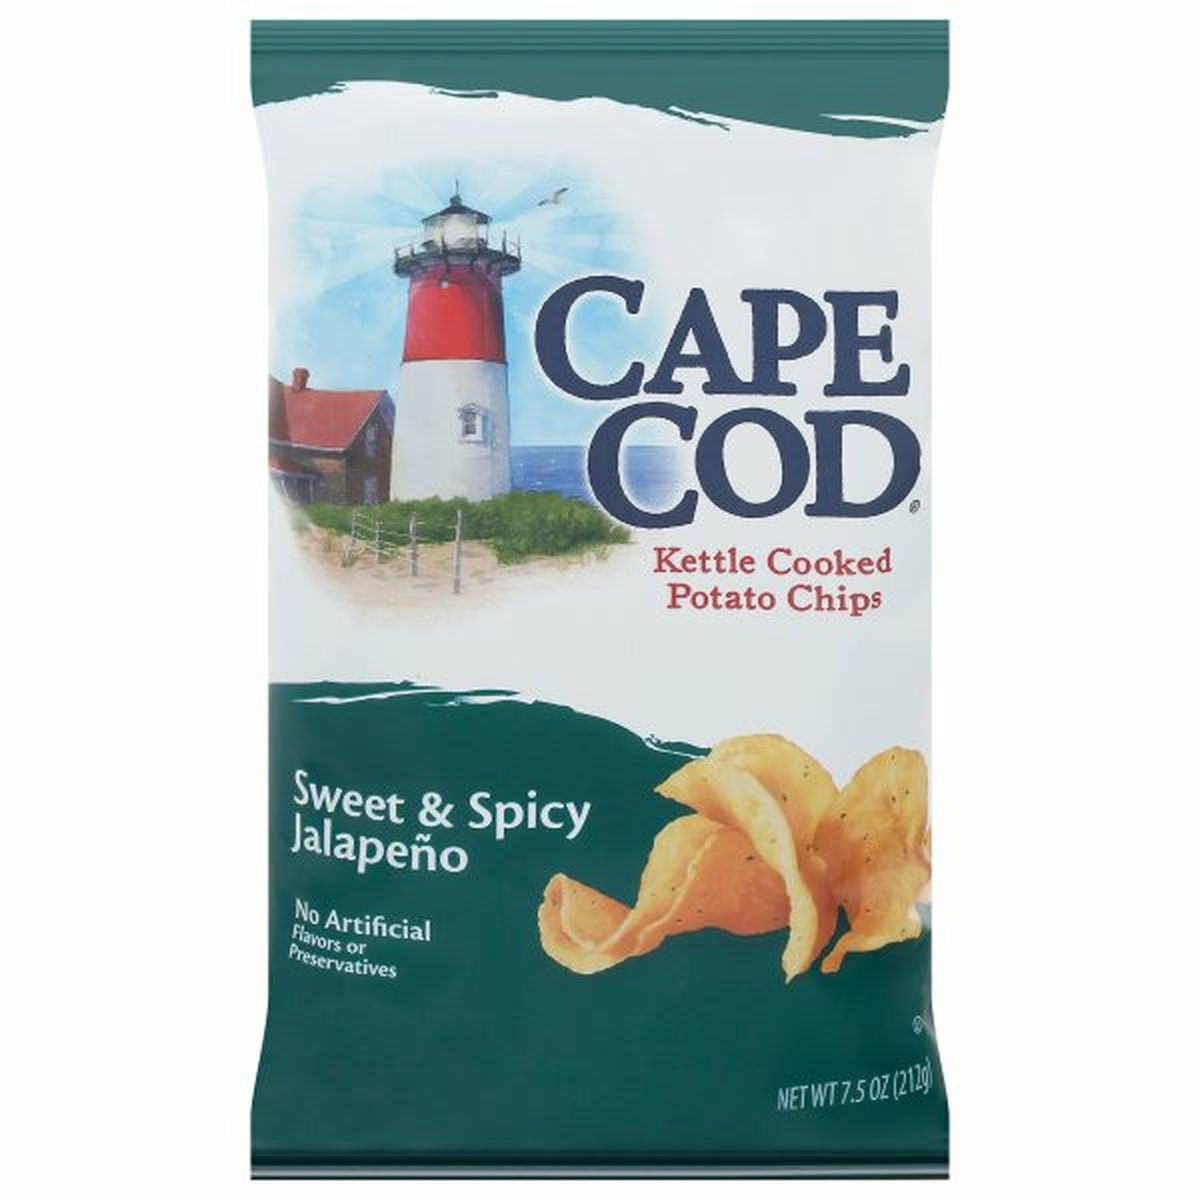 Calories in Cape Cods Potato Chips, Sweet & Spicy Jalapeno, Kettle Cooked